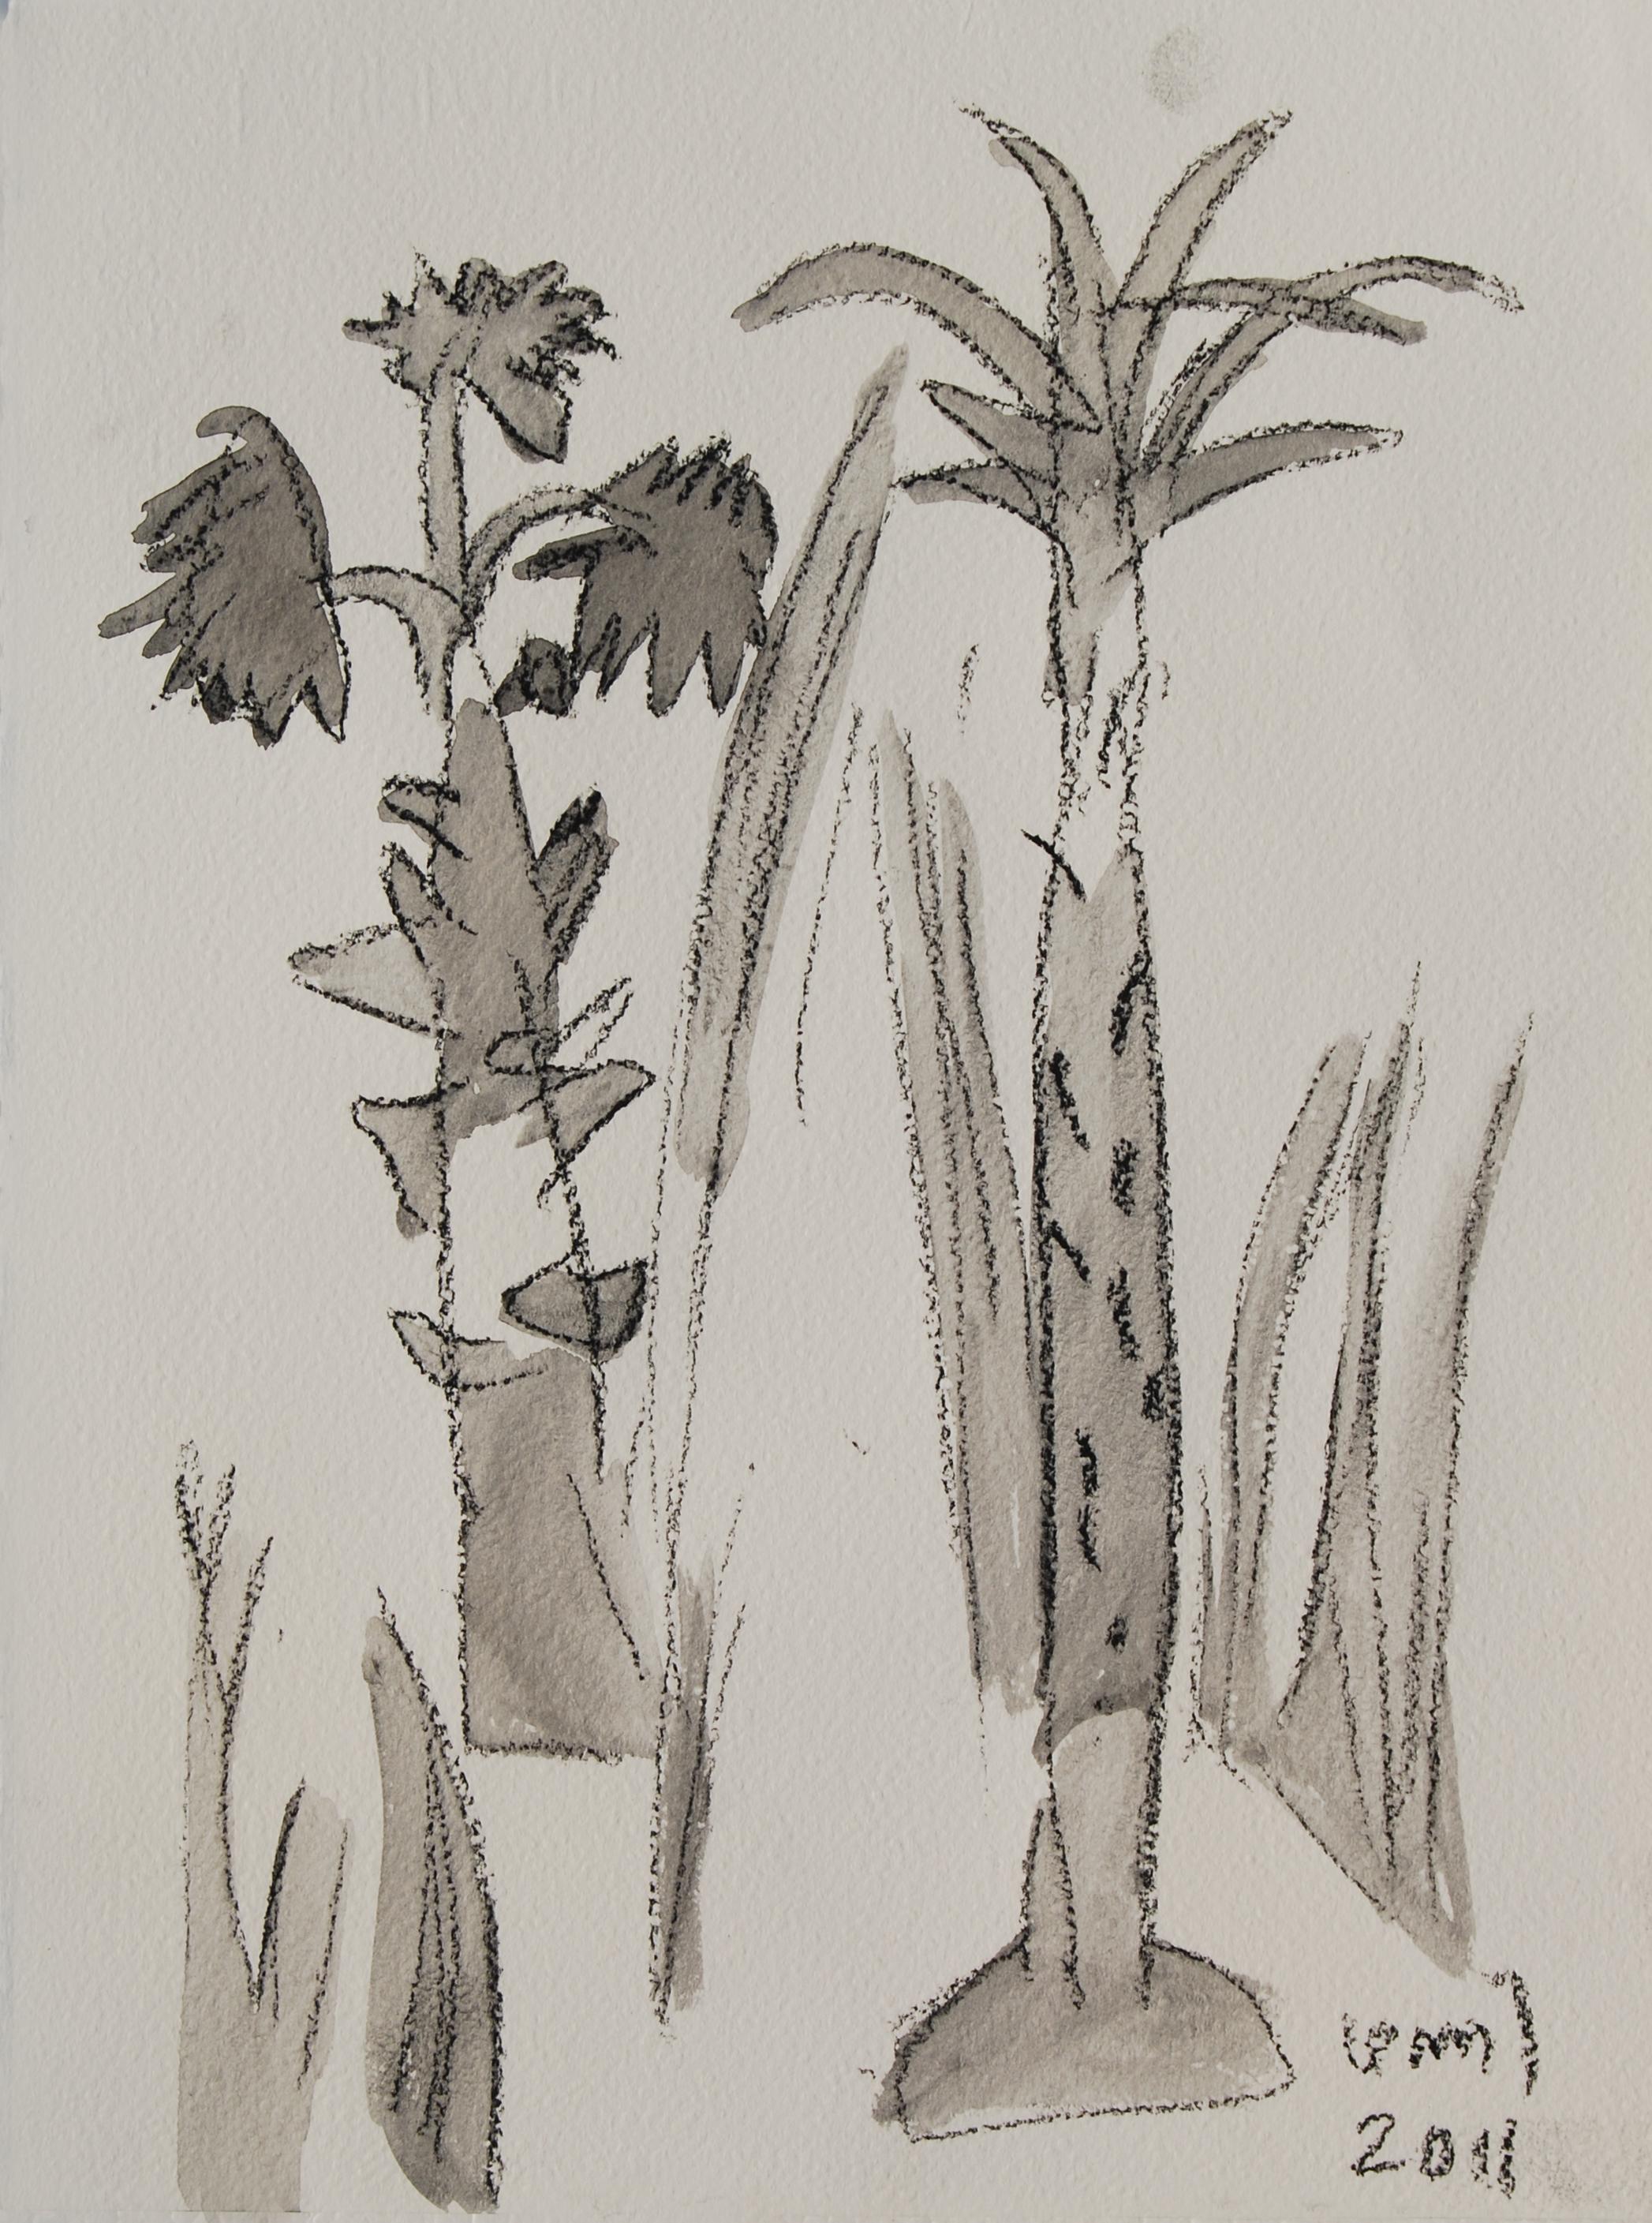 Palm Grooves of South India, Charcoal & Wash on Paper, (set of two) "In Stock"